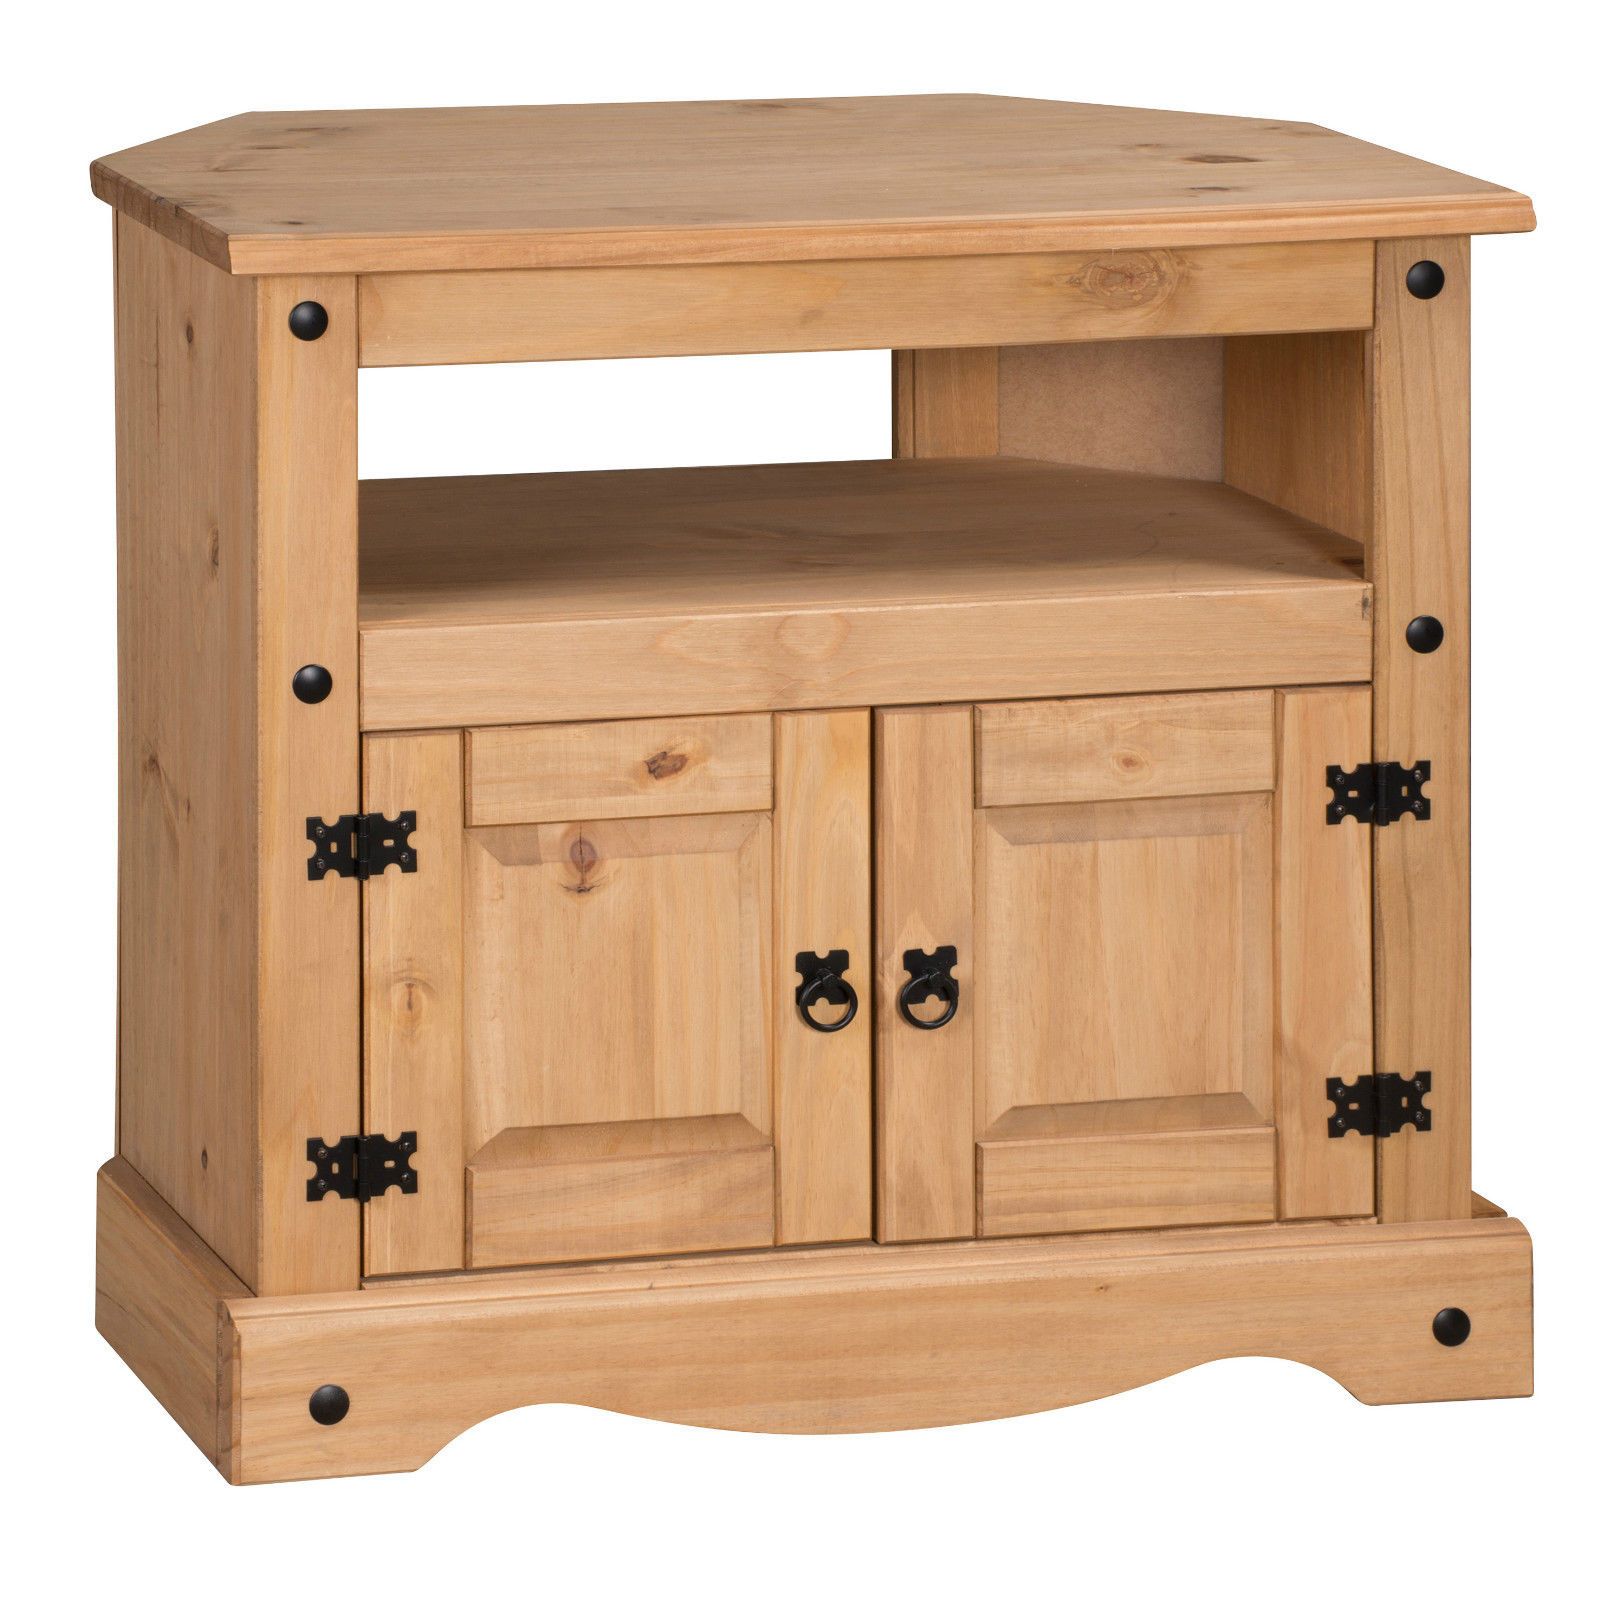 H4home Rustic Corner Tv Stand Solid Wood | H4home Furnitures Intended For Oak Corner Tv Stands (Photo 10 of 15)